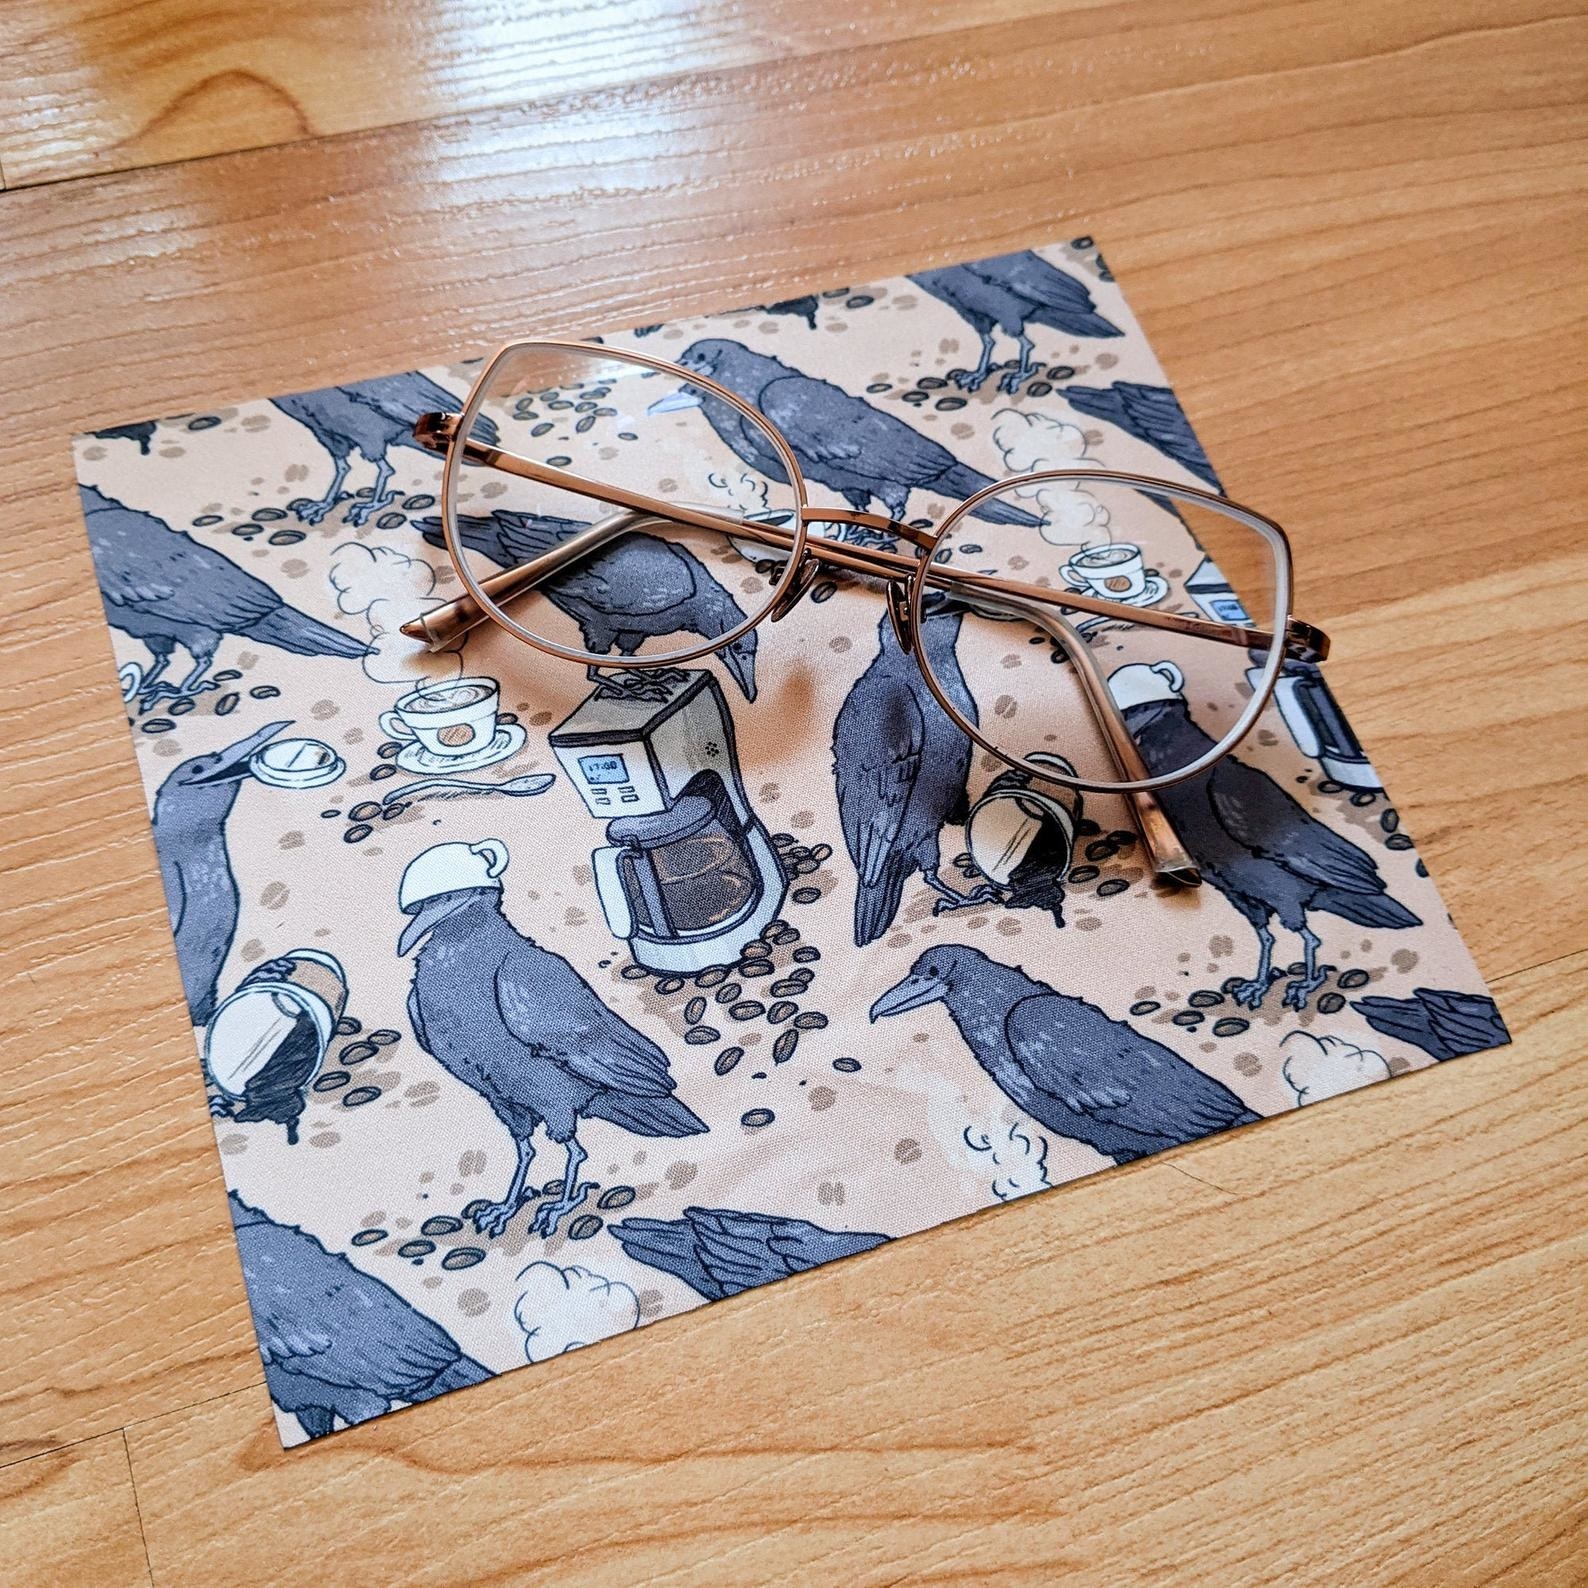 The cleaning cloth with a crow and coffee maker pattern on it